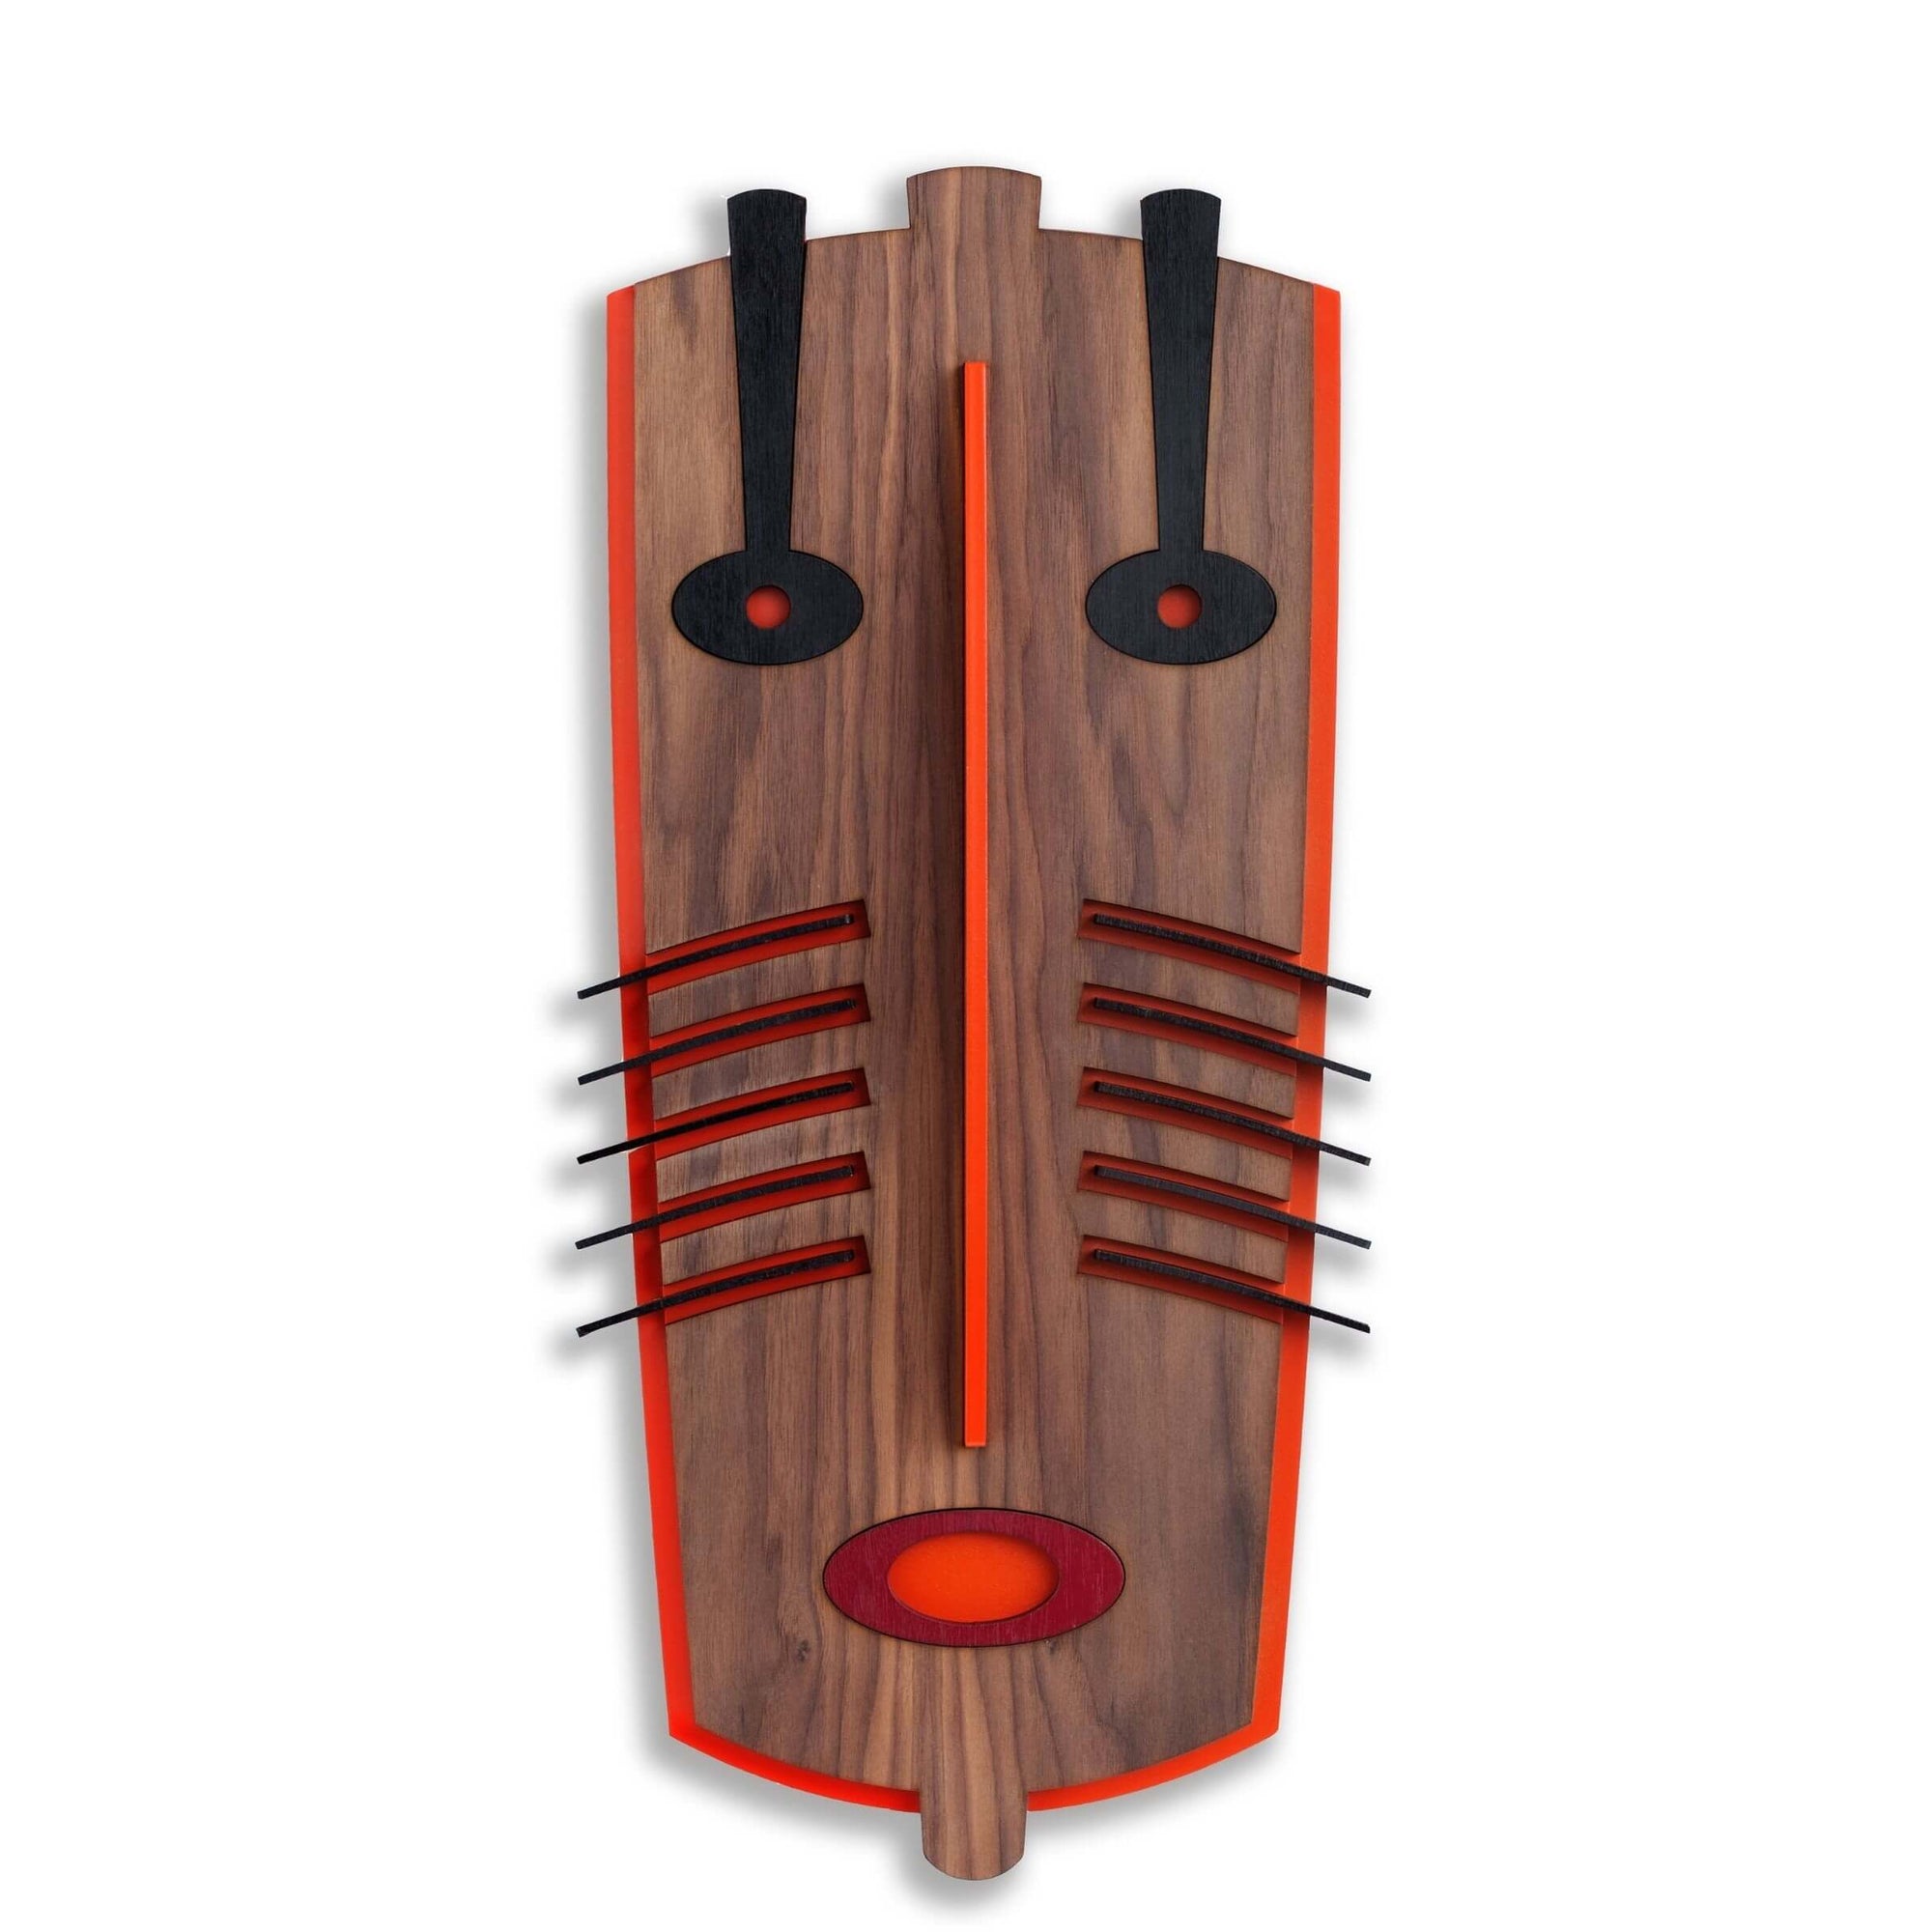 Tribal wall hanging face with colorful and geometric patterns